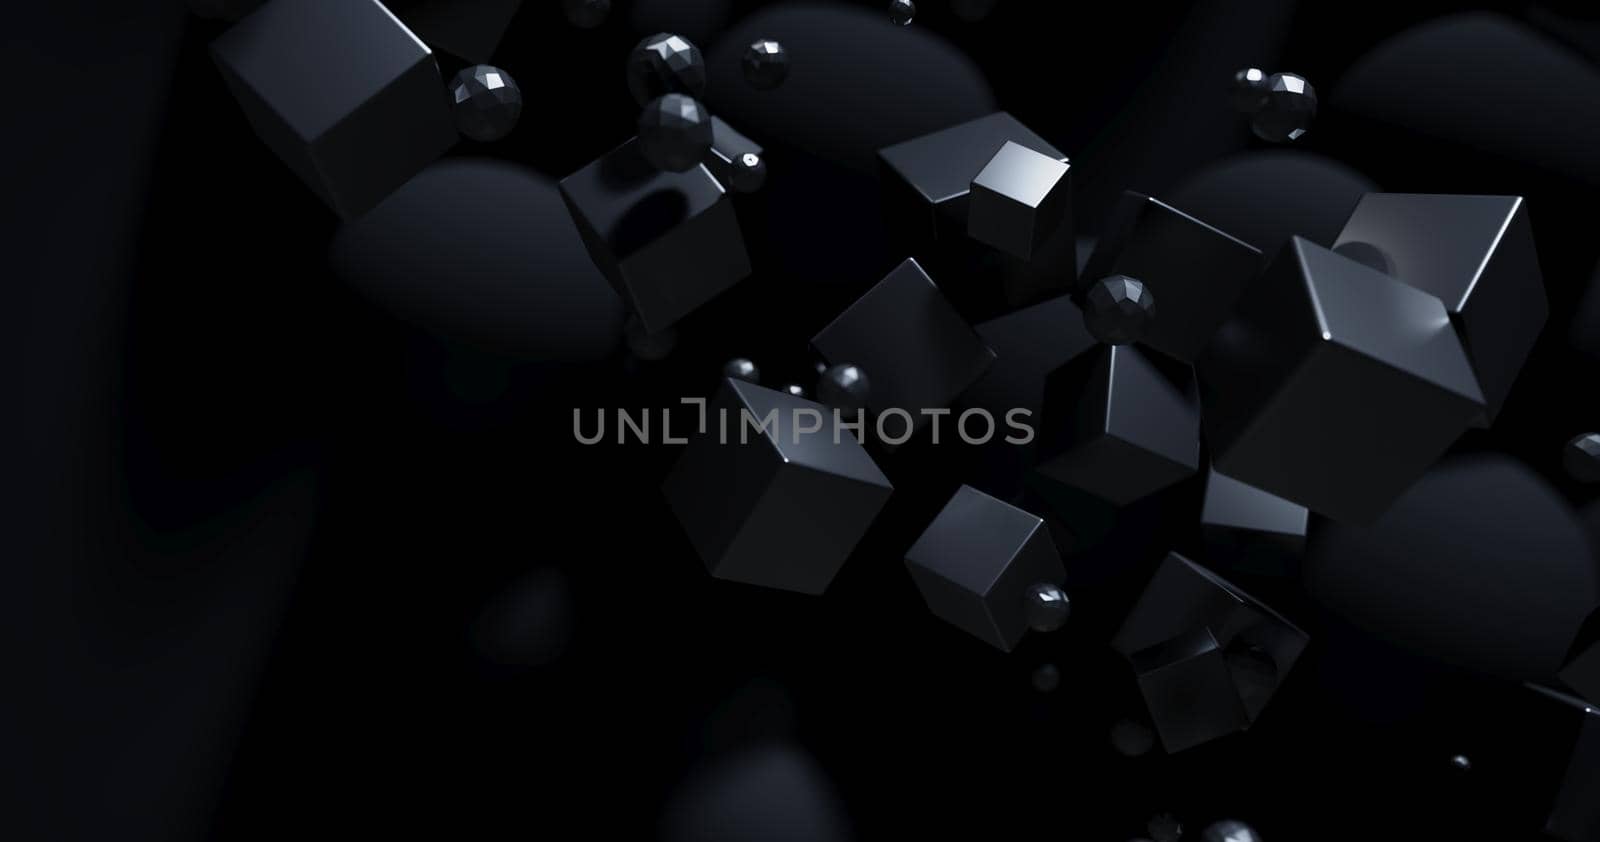 Polygonal objects in dark space, abstract futuristic black background design, 3d rendering by Dvorak